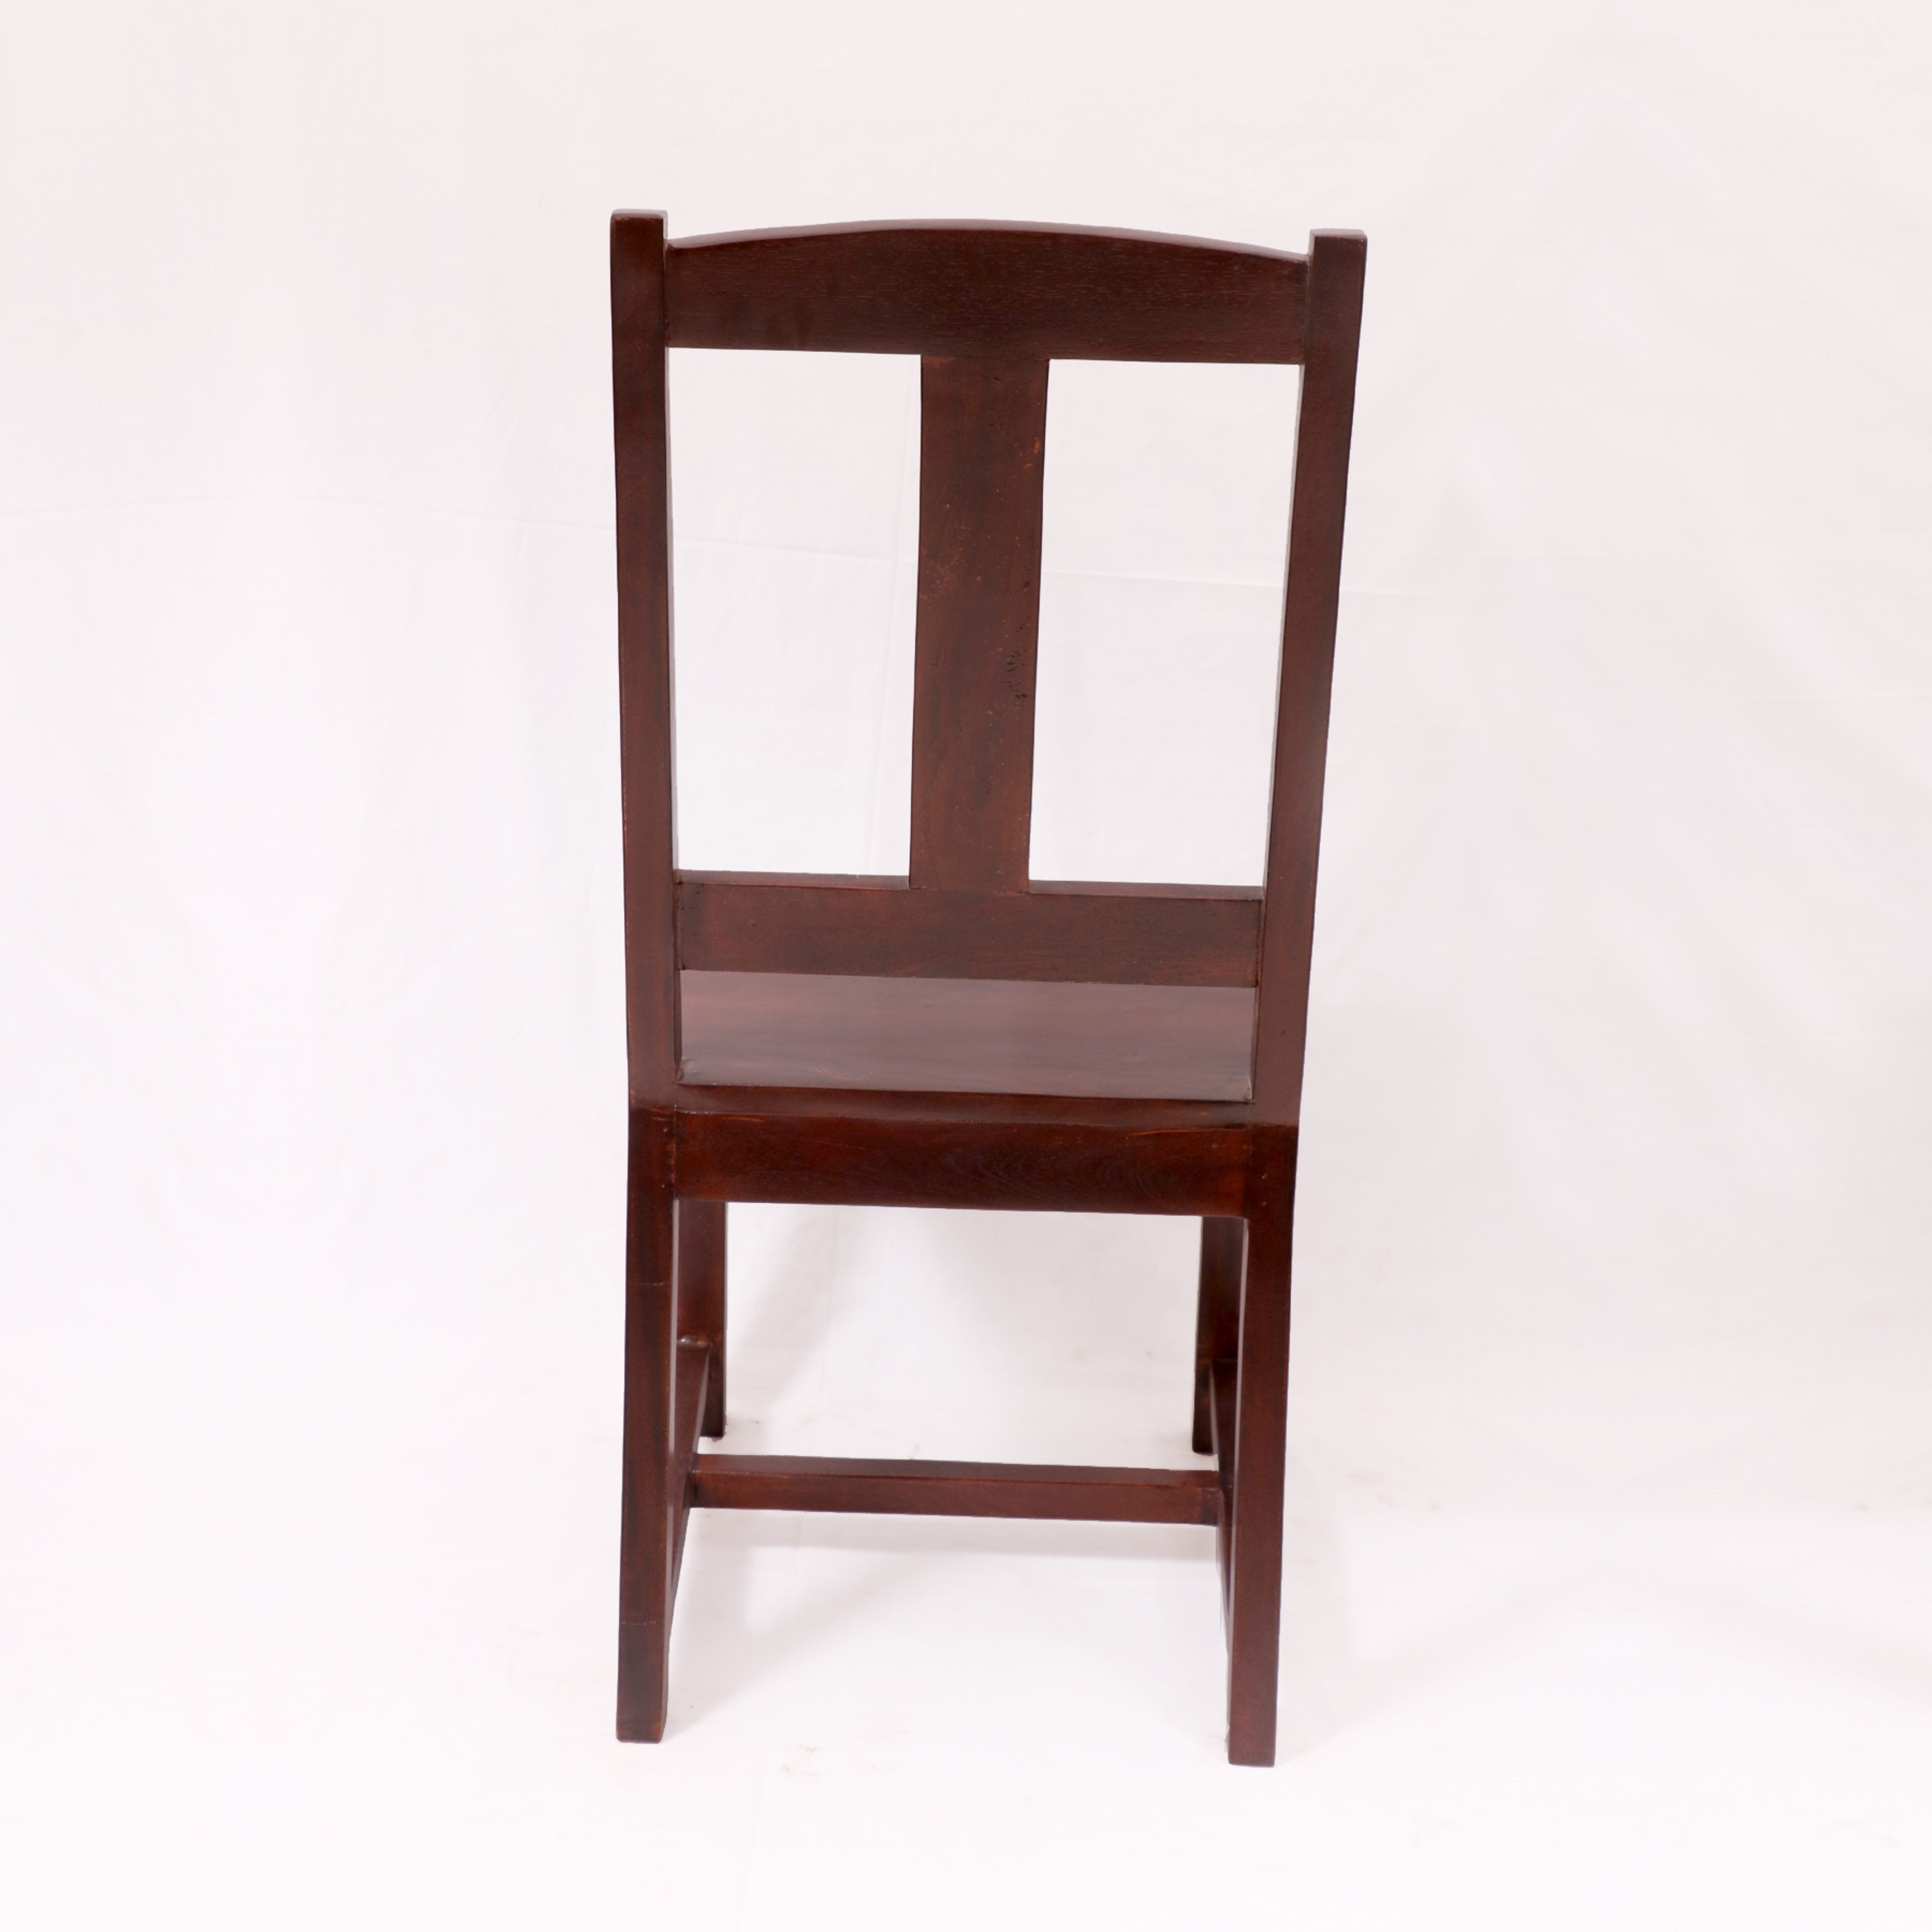 (Set of 2) Natural Tone Simple Country Wood Chair Dining Chair